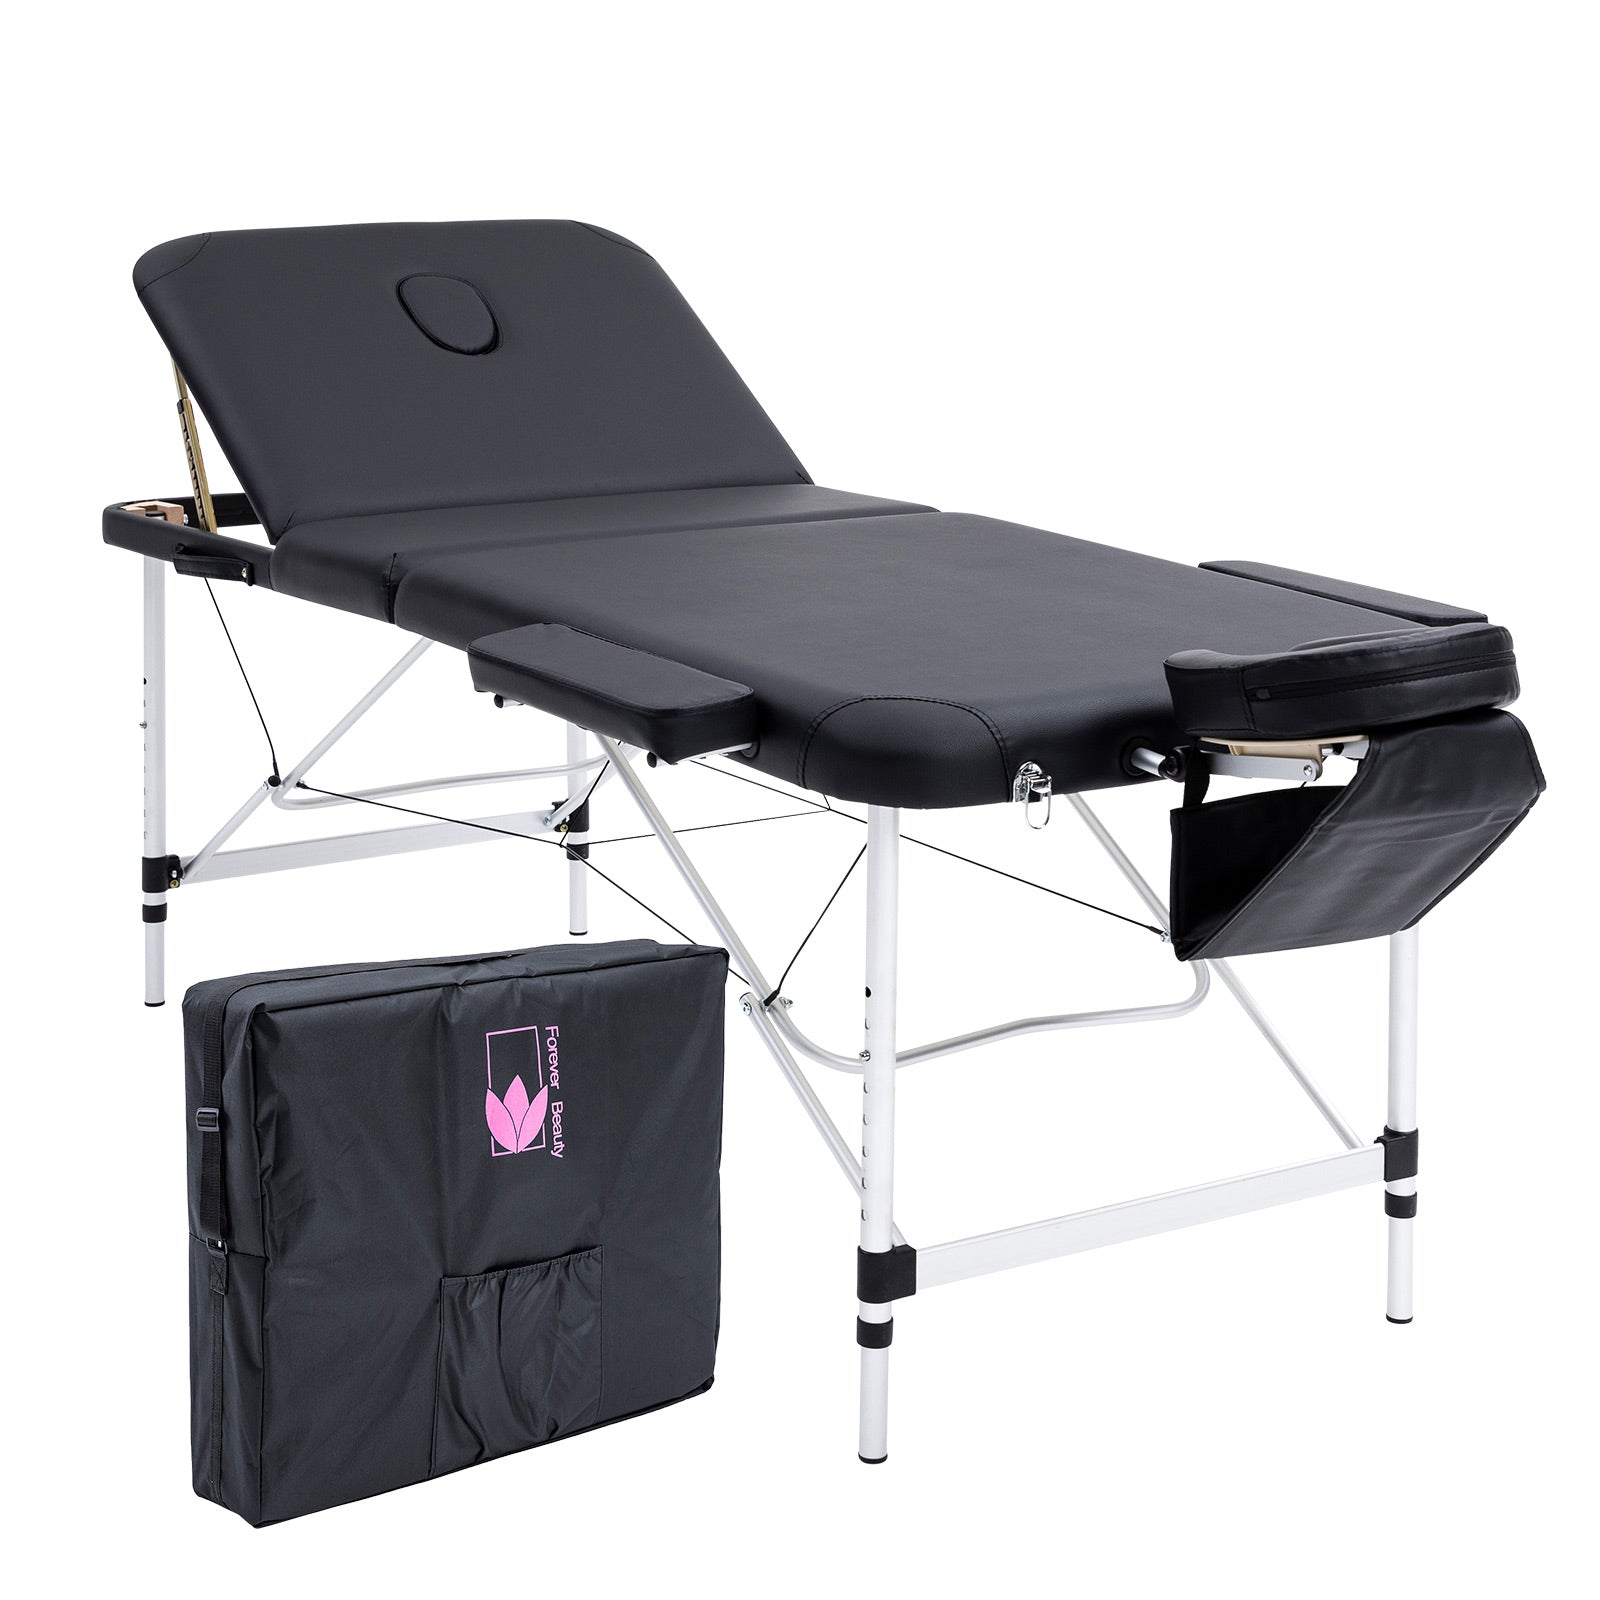 Forever Beauty Black Portable Beauty Massage Table Bed Therapy Waxing 3 Fold 75cm Aluminium - SILBERSHELL